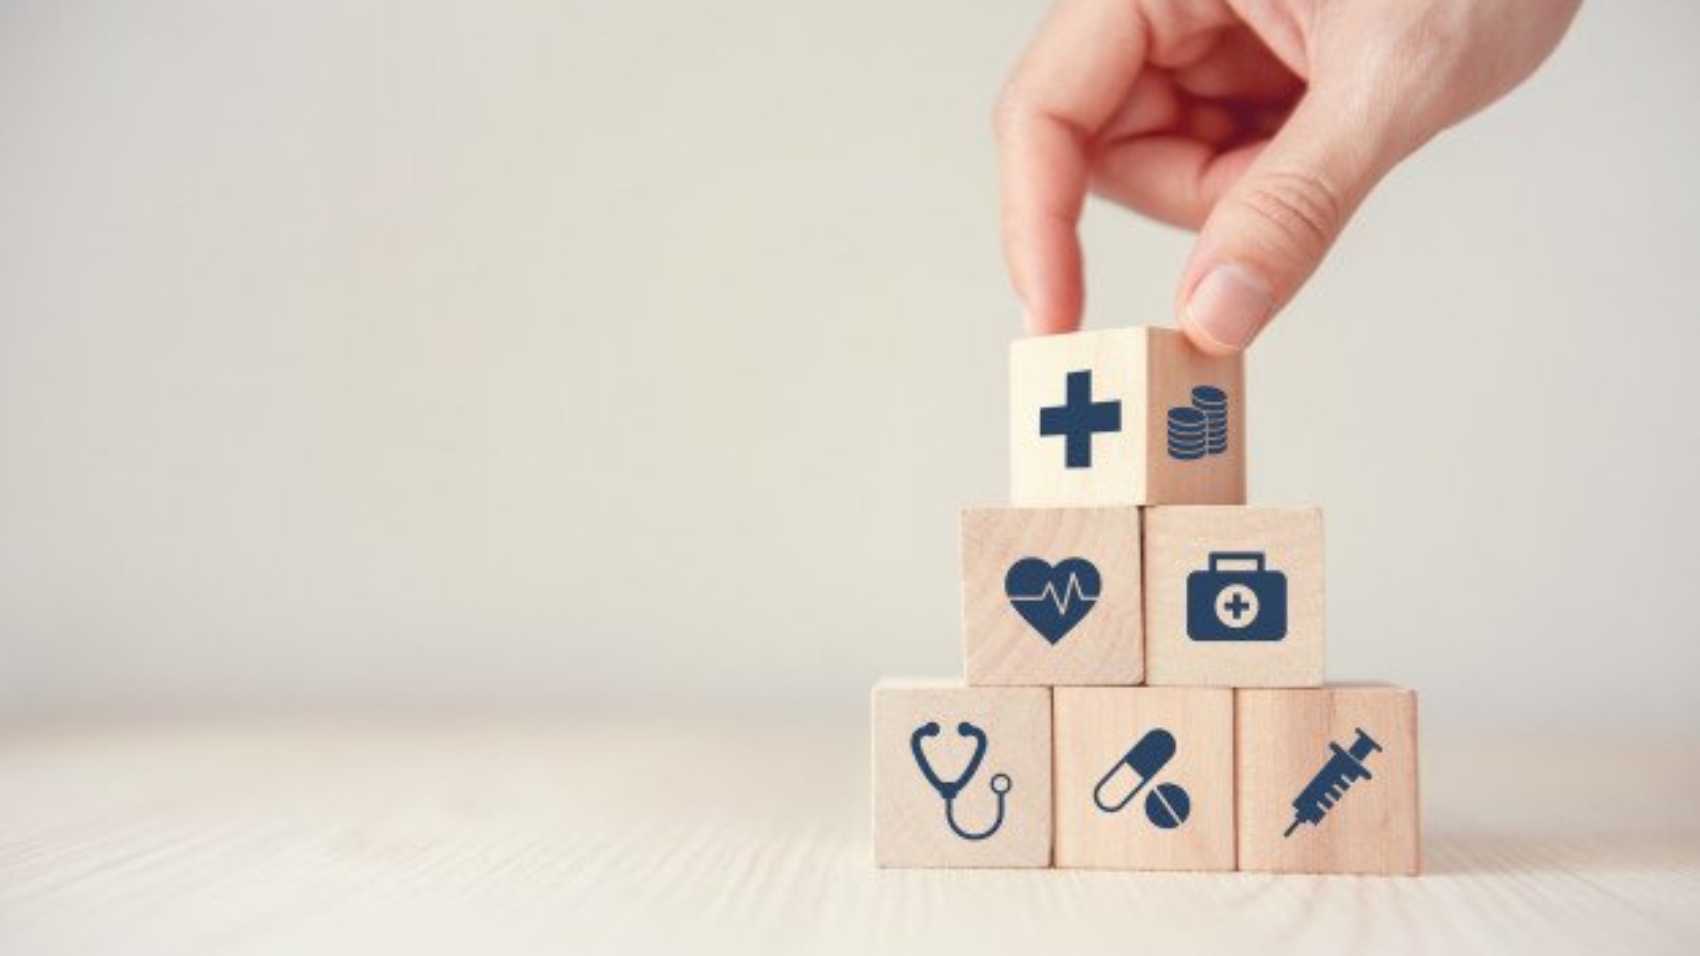 health-insurance-concept-reduce-medical-expenses-hand-flip-wood-cube-with-icon-healthcare-medical-coin-wood-background-copy-space_52701-34